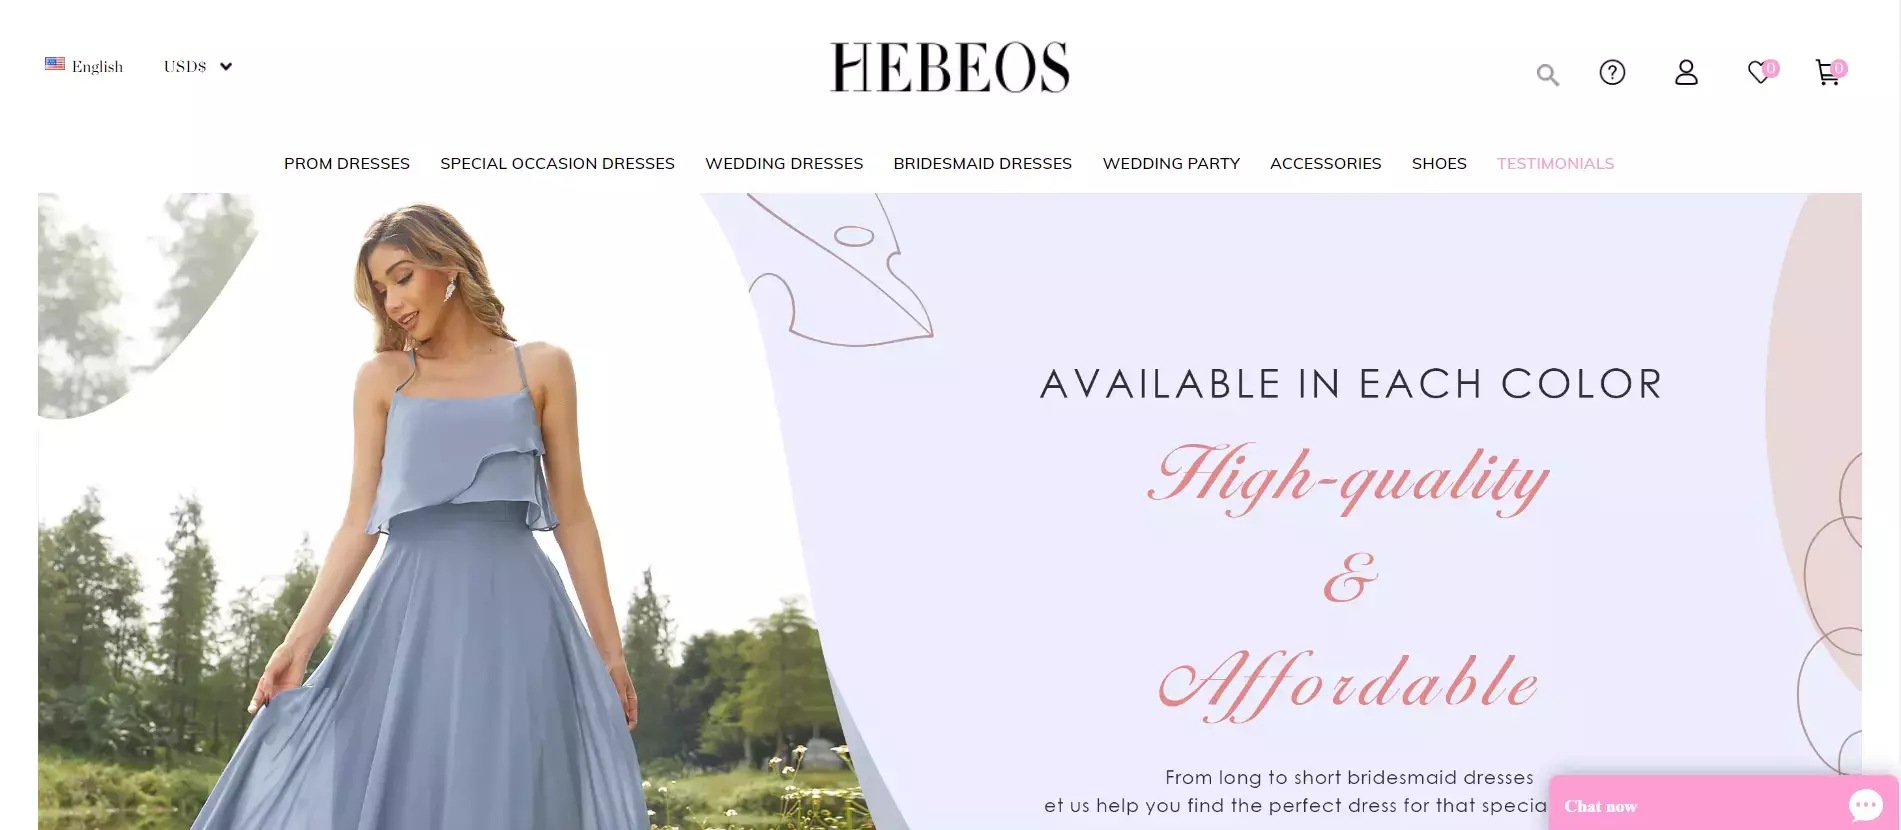 Hebeos Store Reviews